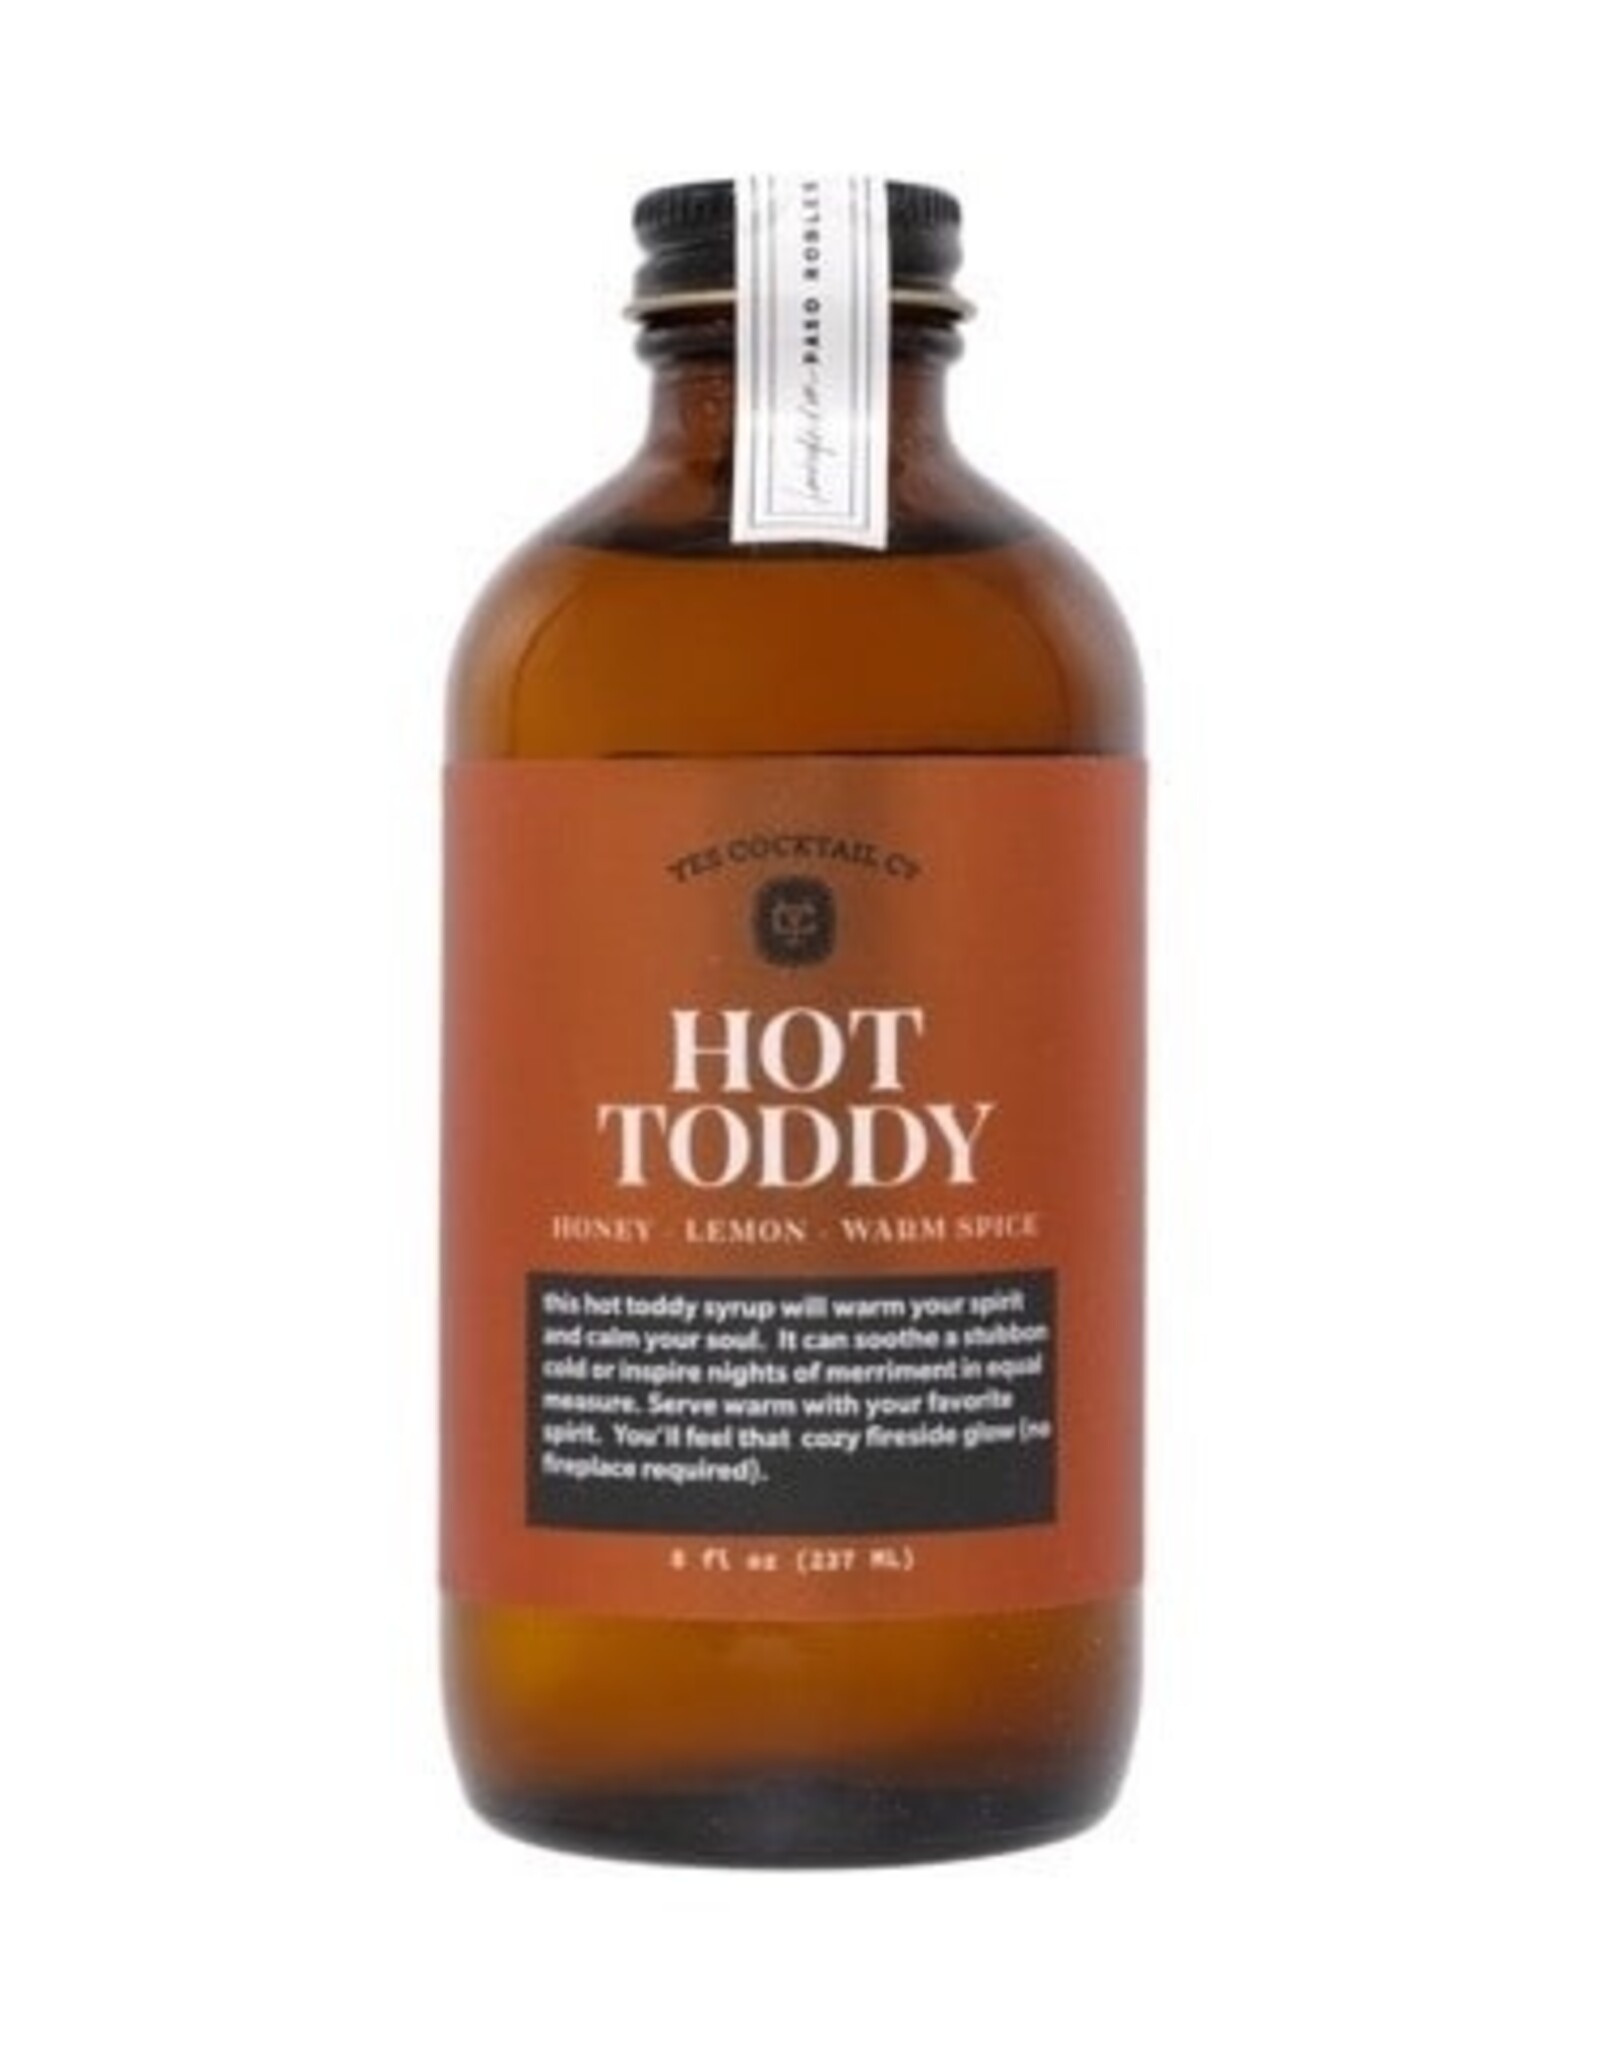 Yes Cocktail Co. Hot Toddy Syrup